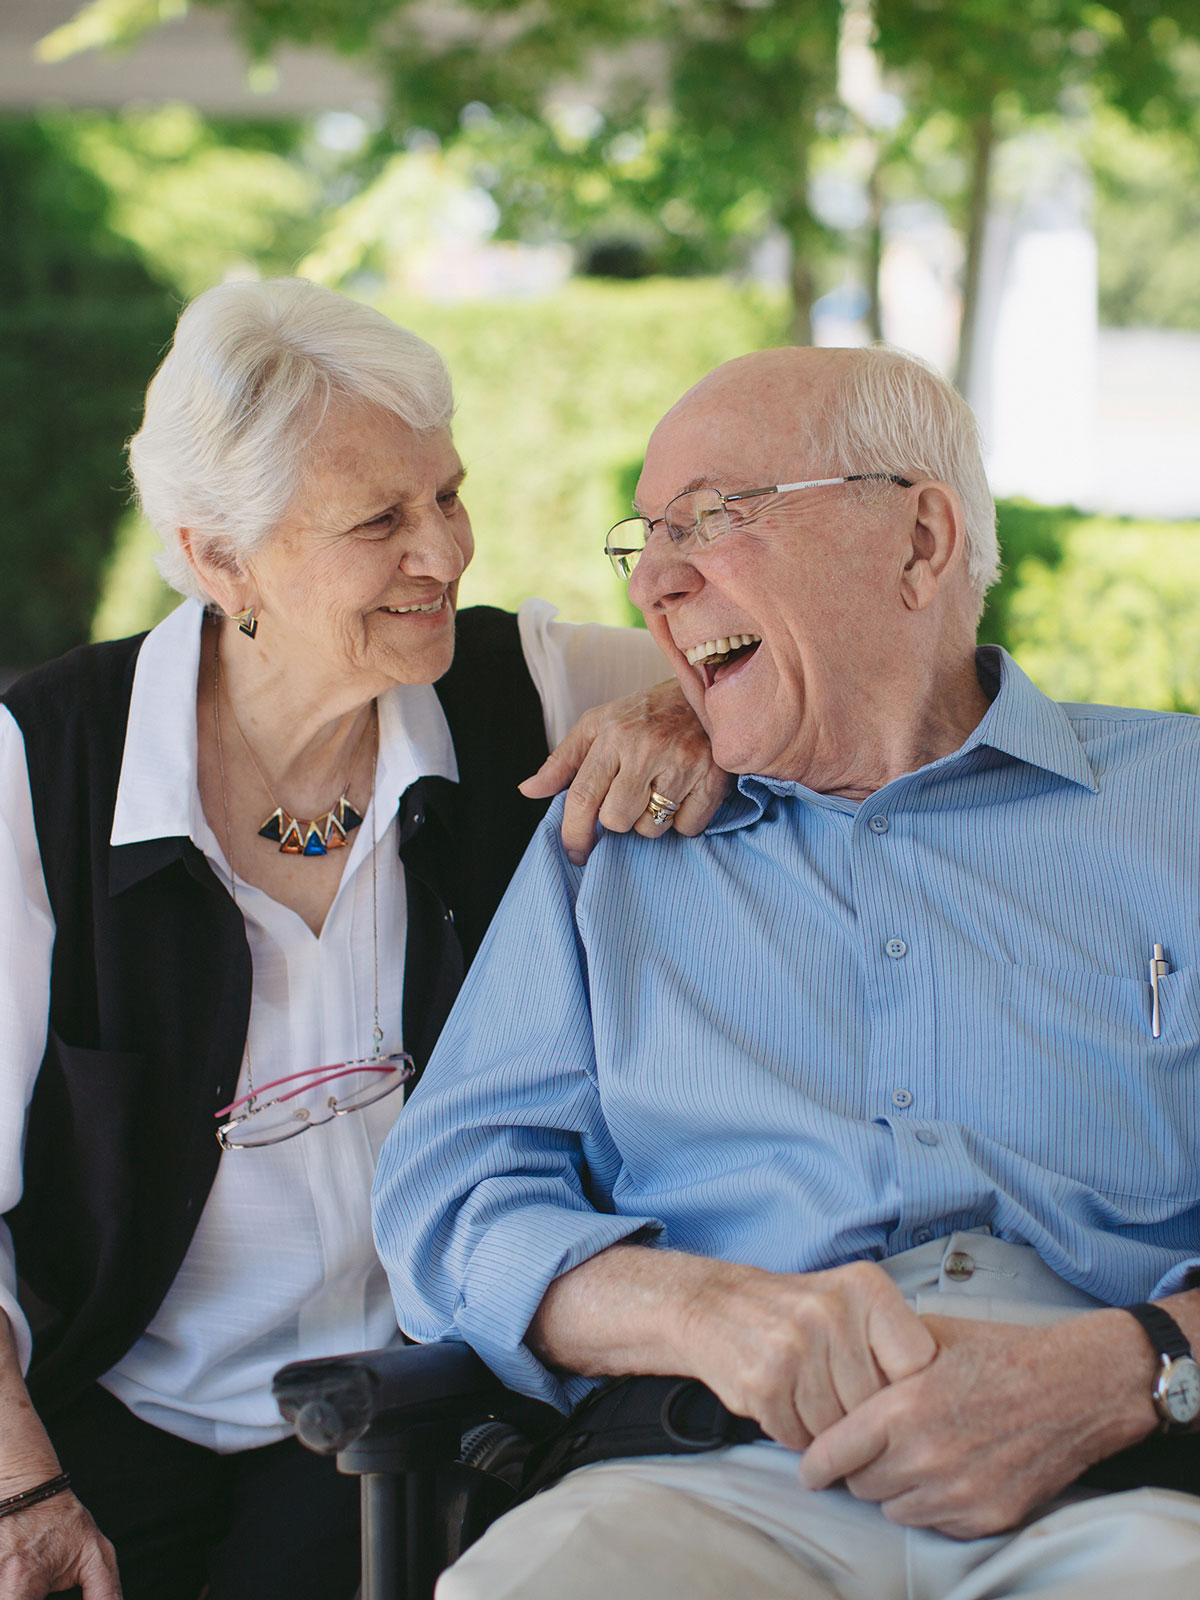 Retired Couple Laughing